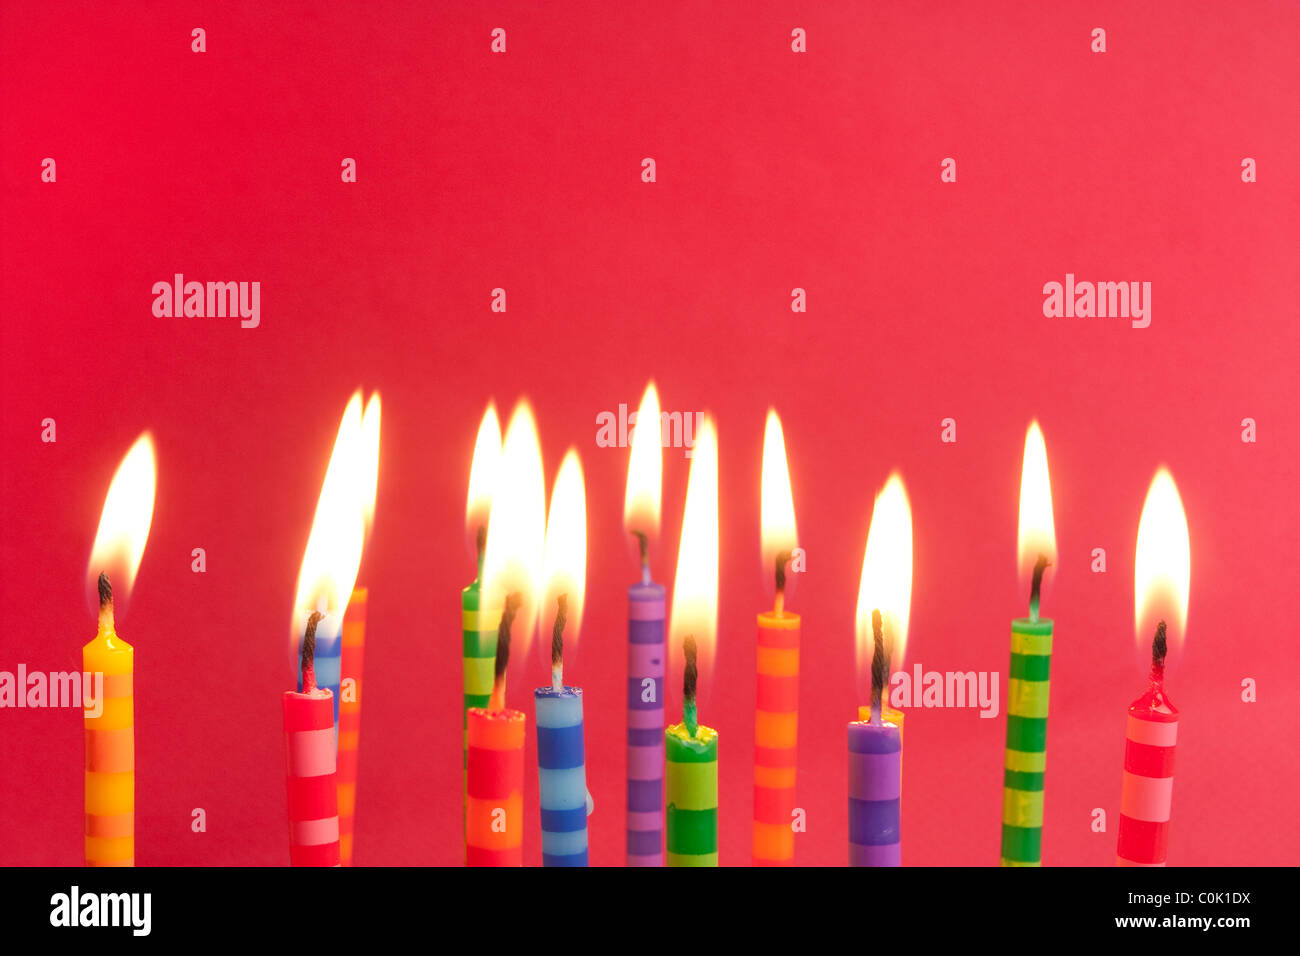 Candles alight on a red background, big group of striped designs Stock Photo